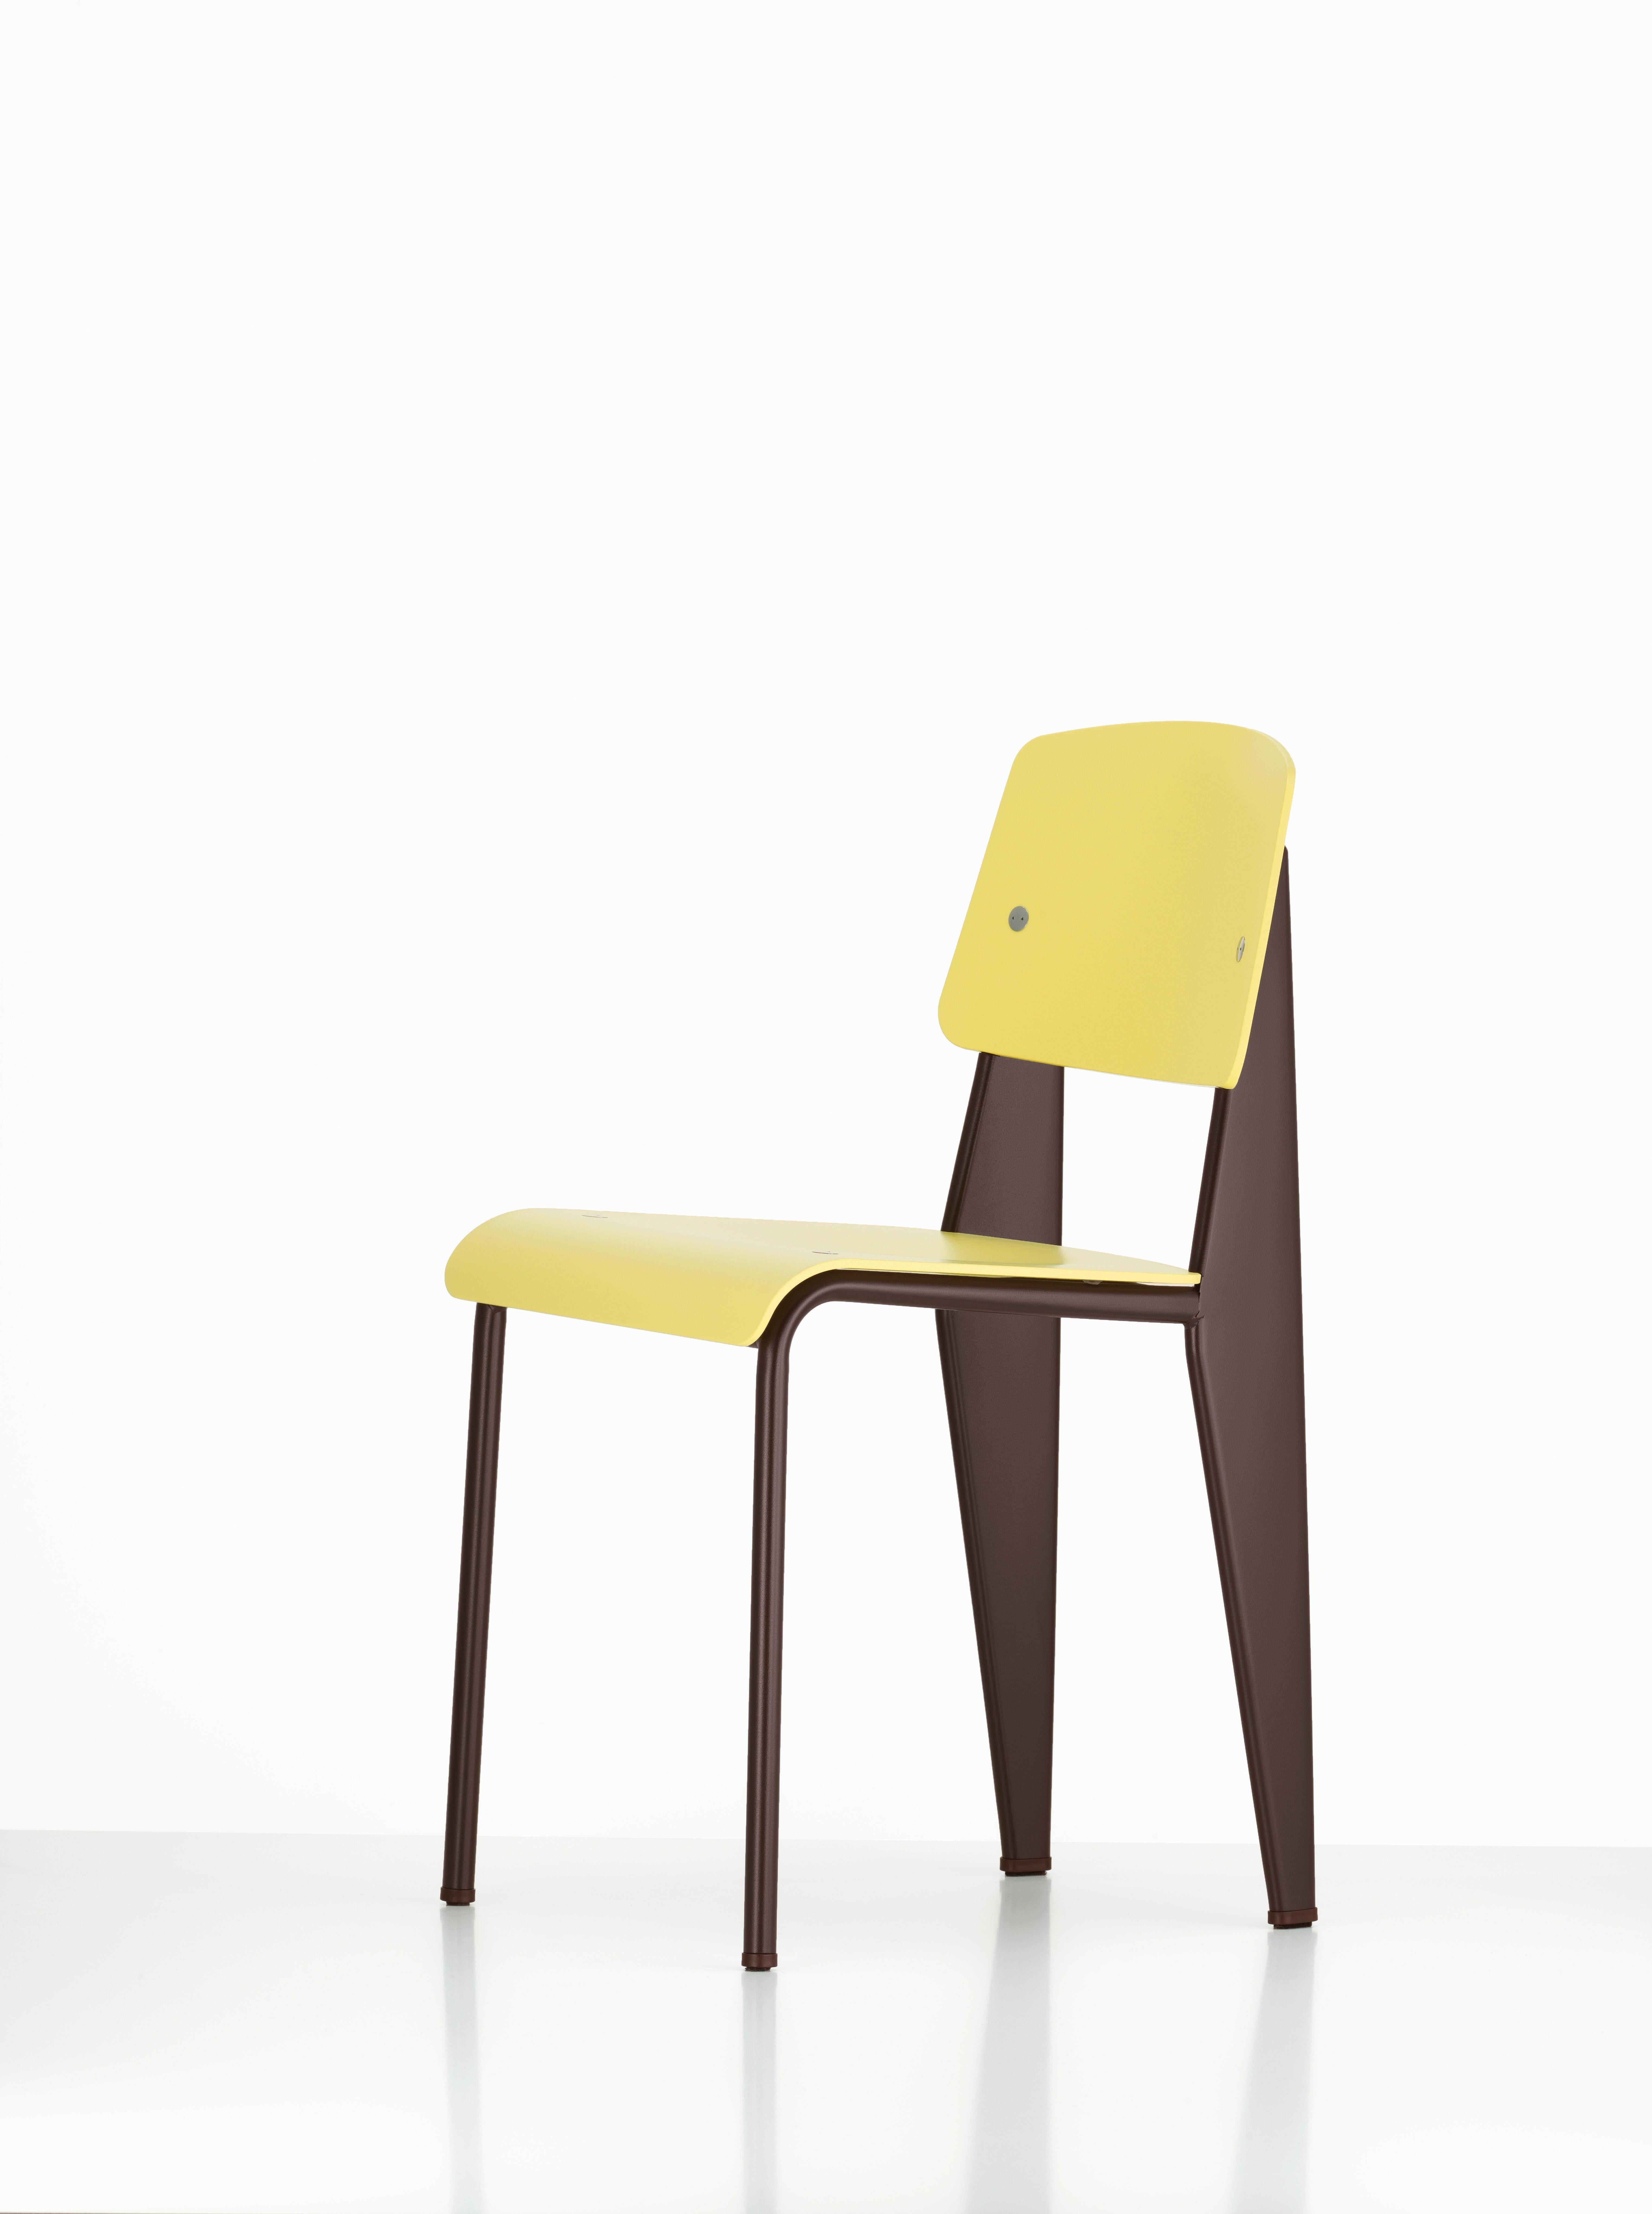 Modern Vitra Standard SP Chair in Citron & Chocolate by Jean Prouvé For Sale